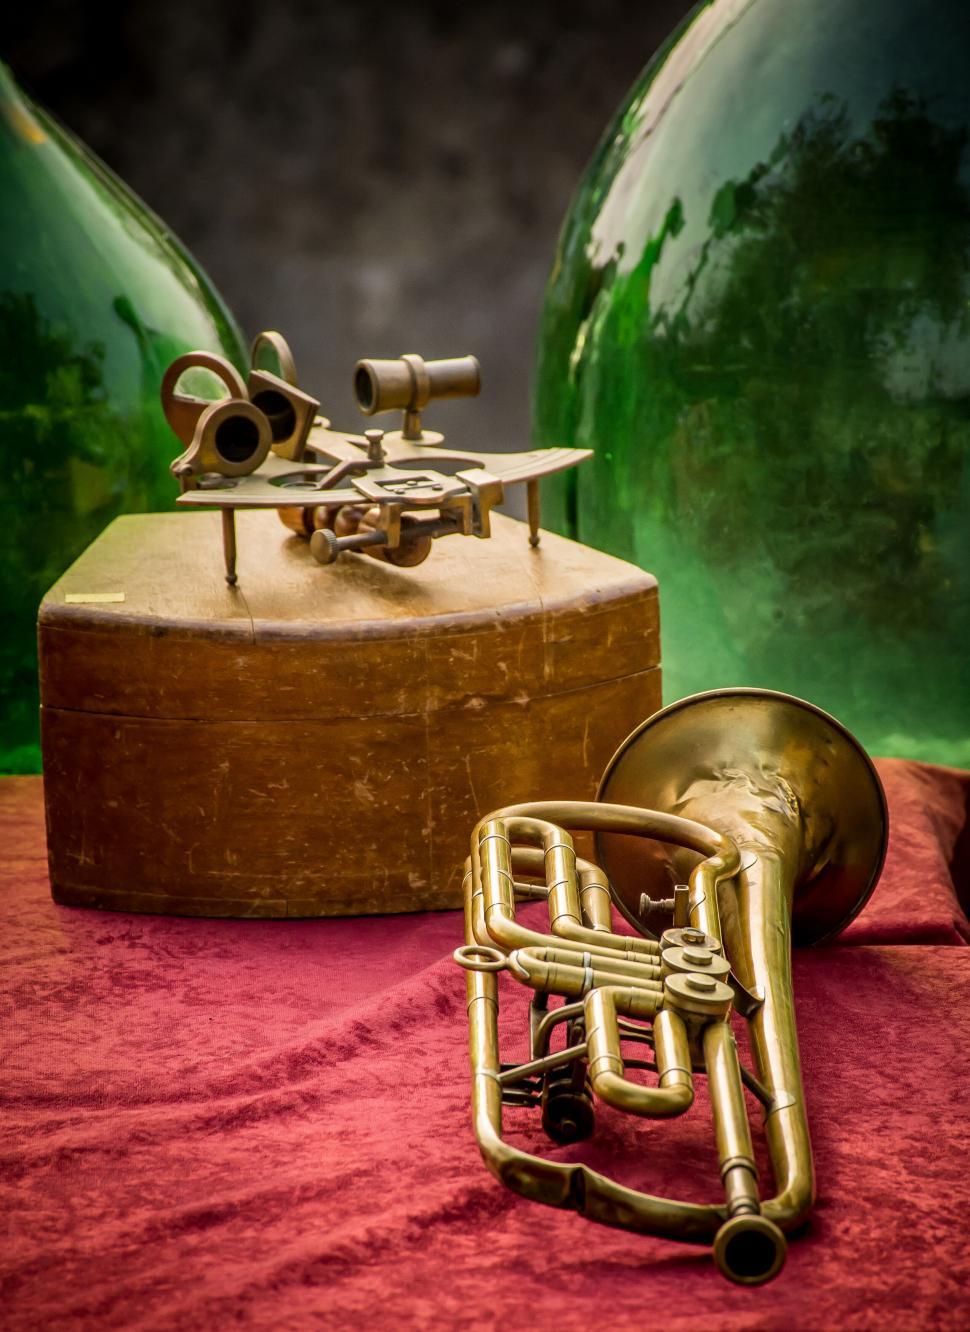 Free Image of Vintage brass instruments on red cloth 